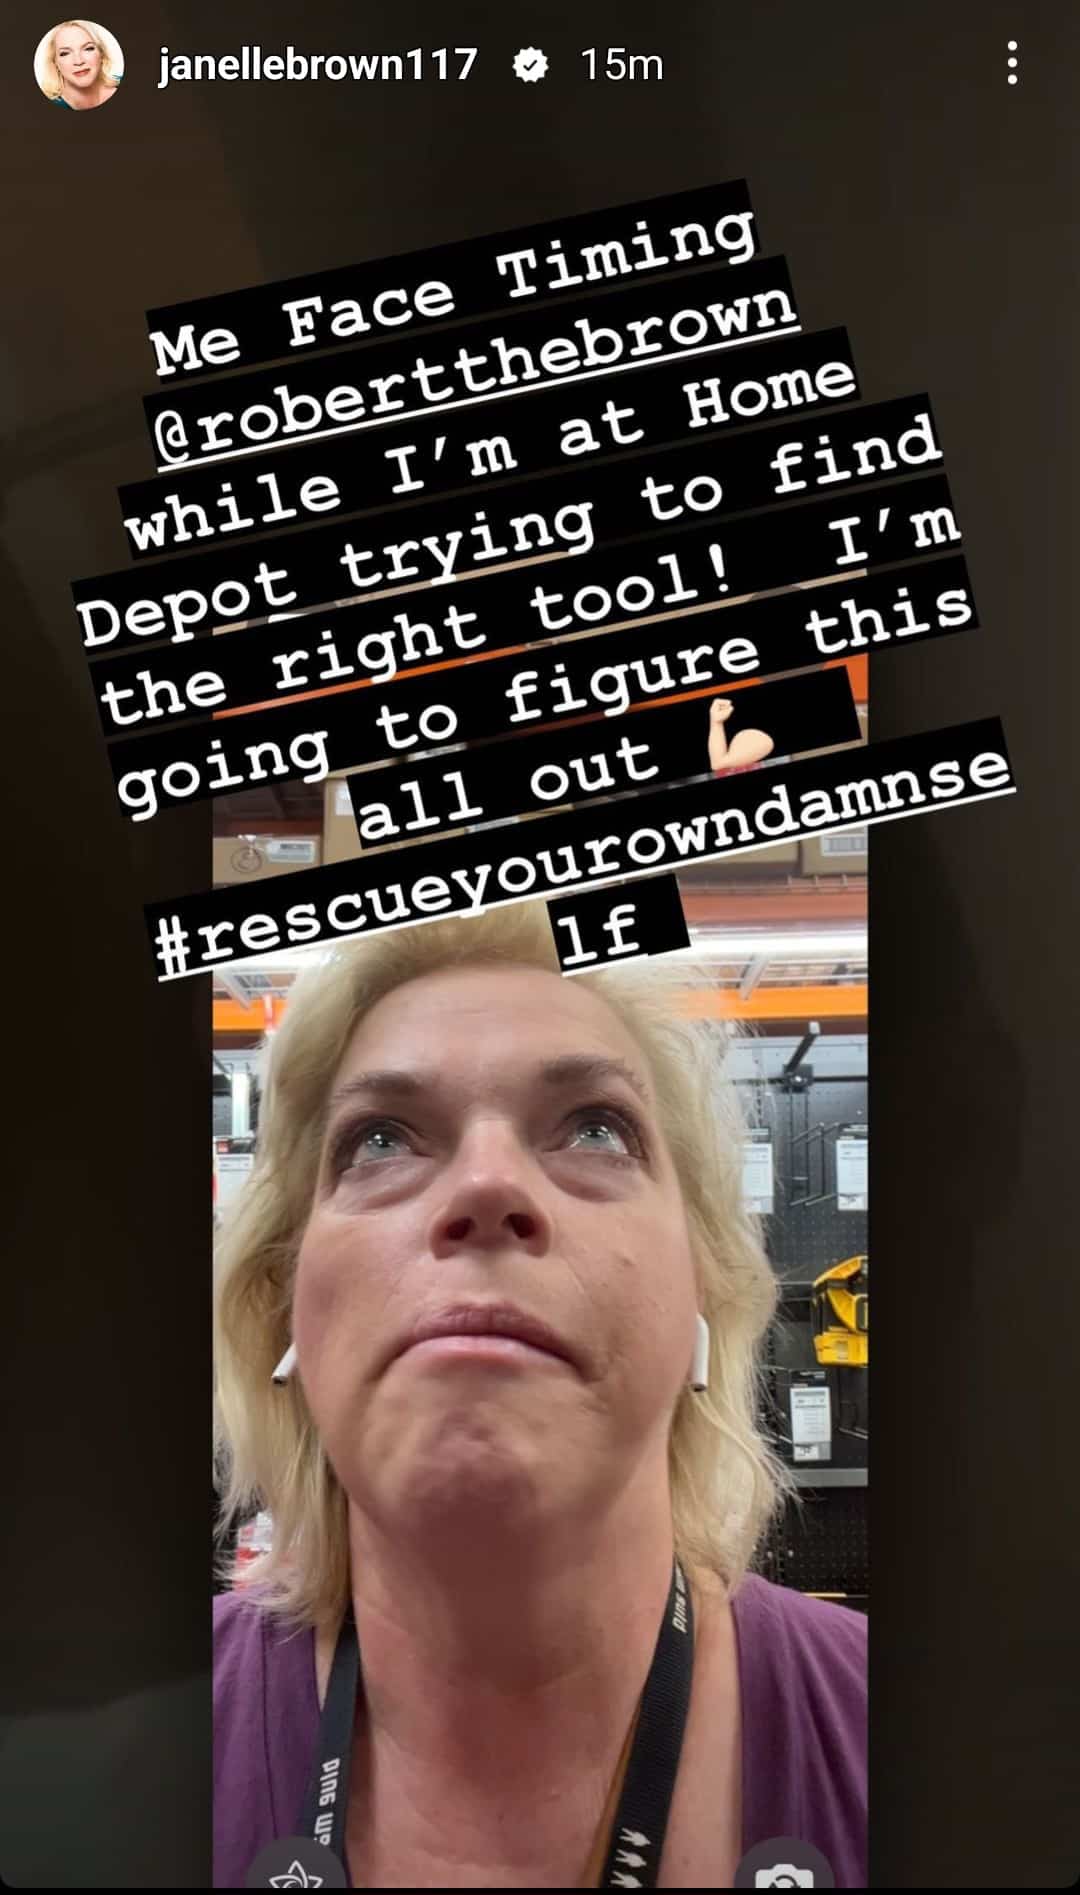 janelle brown's screenshot instagram story from home depot